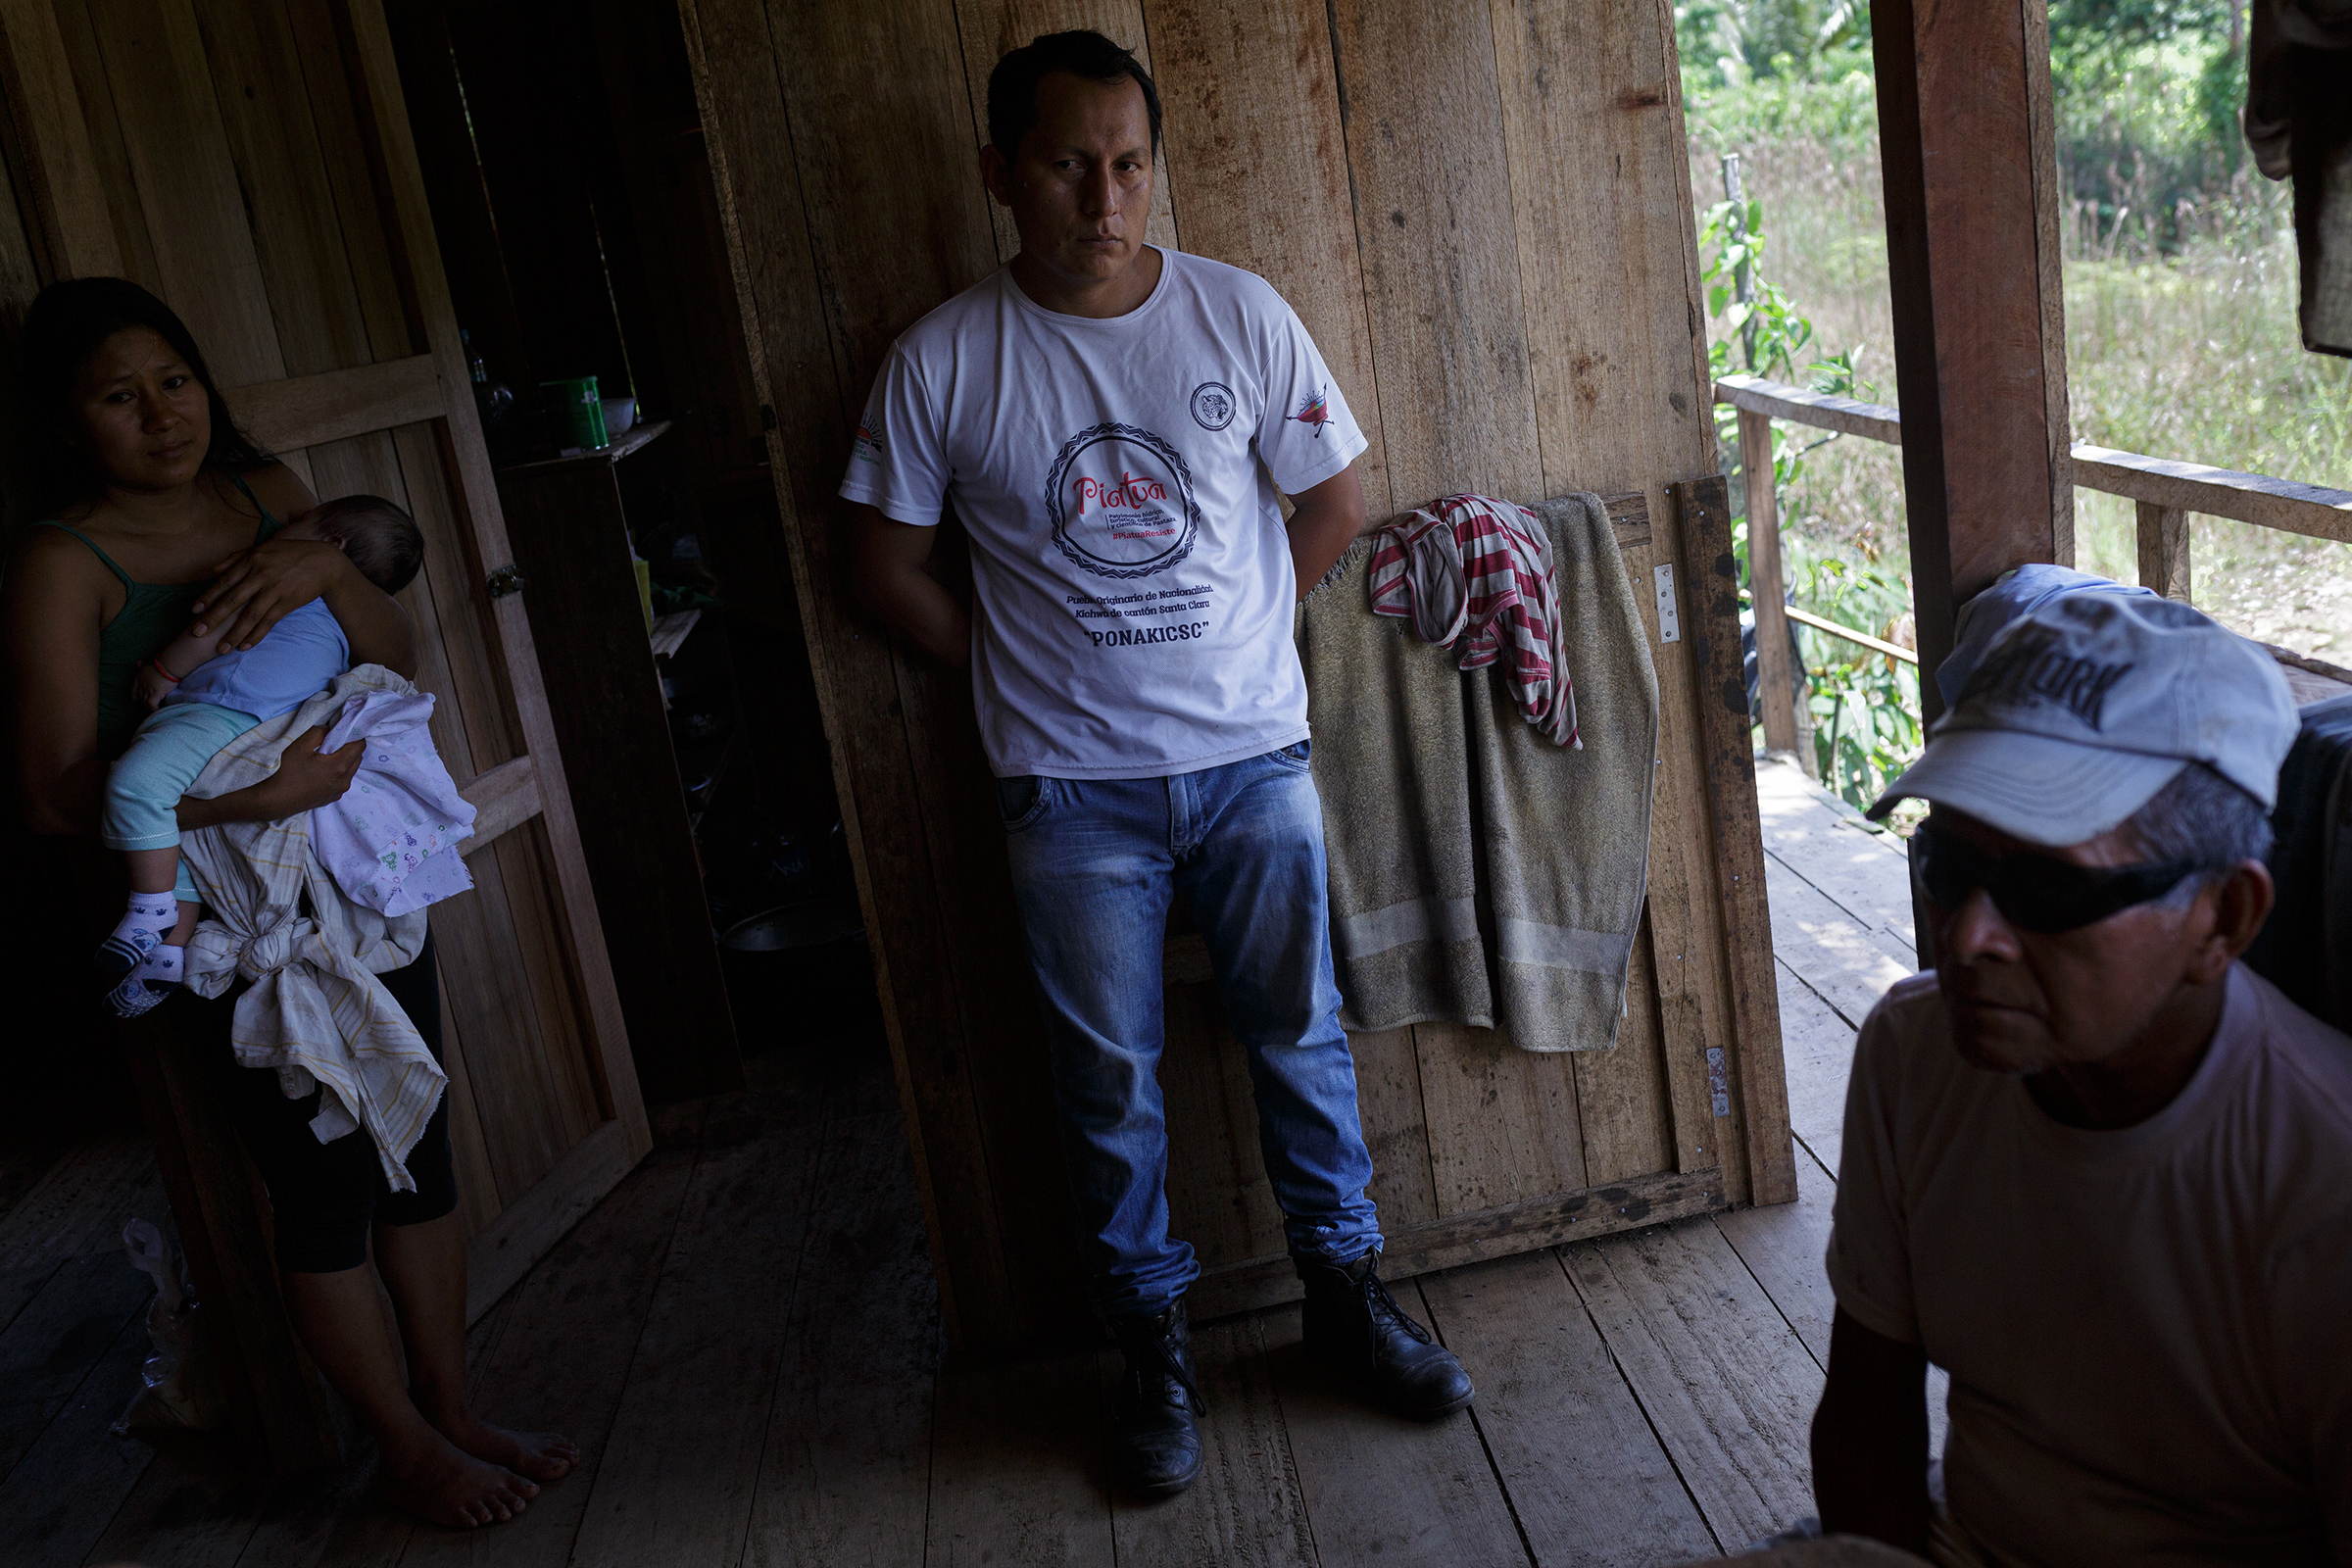 From left: María, daughter of Clemente Grefa; Darling Kaniras, a well-known activist in the community; and Clemente Grefa, pictured in Clemente’s home next to the Piatúa River. (Andrés Yépez for TIME)